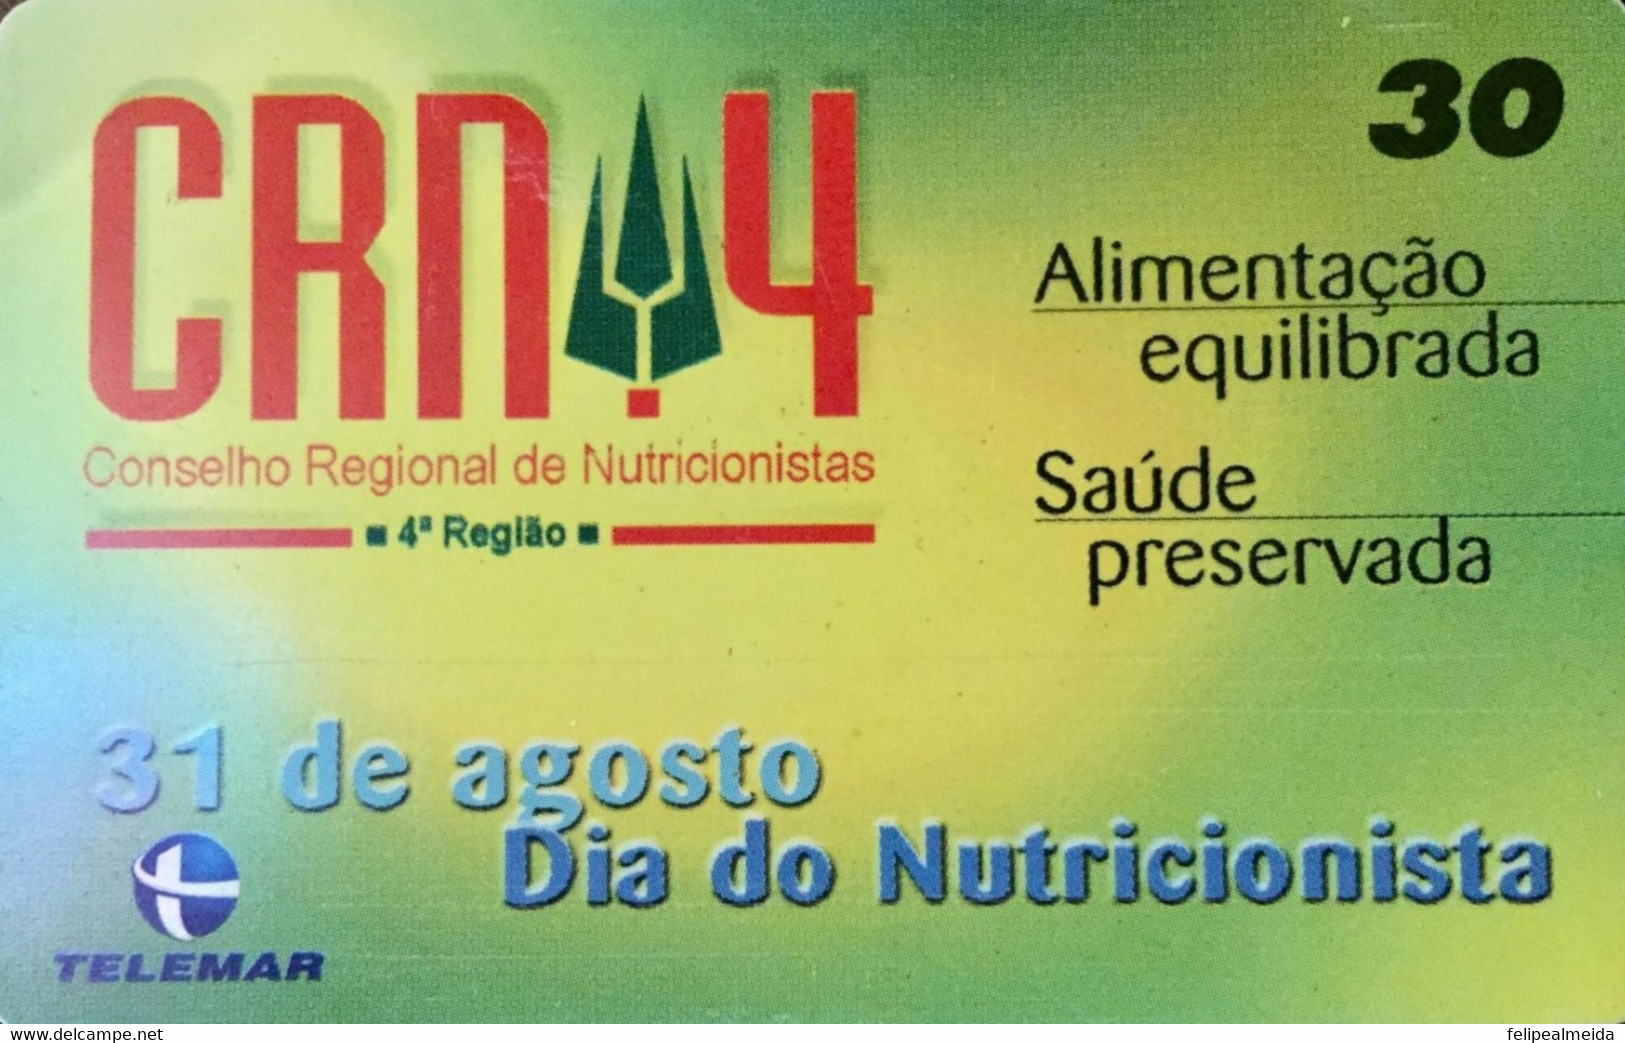 Phone Card Manufactured By Telemar In 1999 - Homage To The Nutritionist Day Celebrated On 31 August - Food